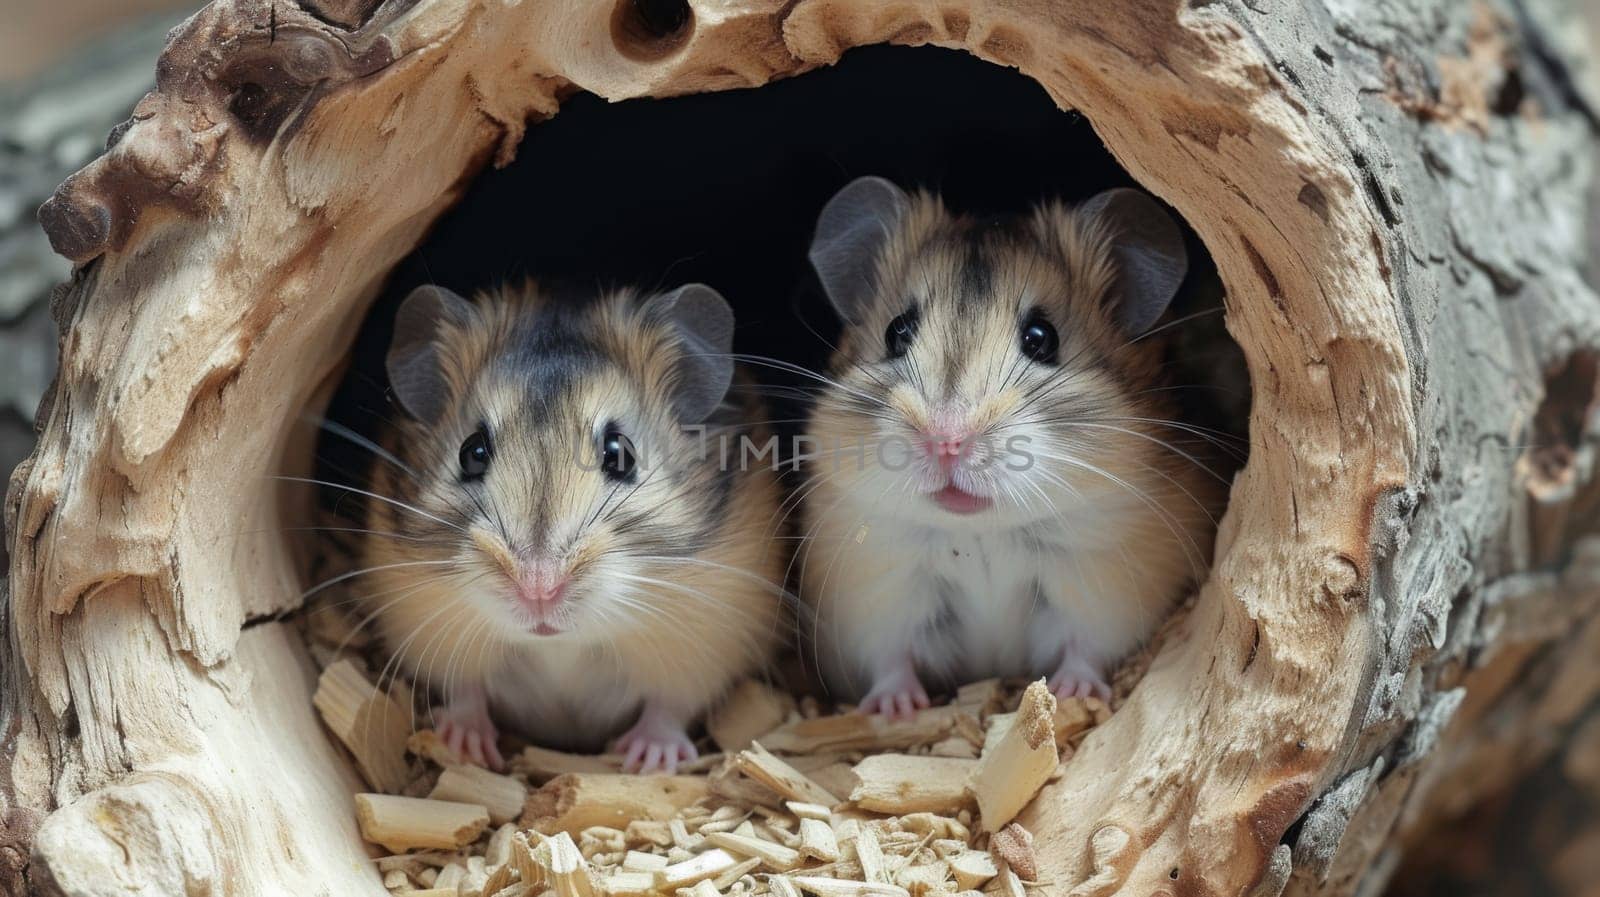 Two small rodents are sitting in a hollow log, AI by starush